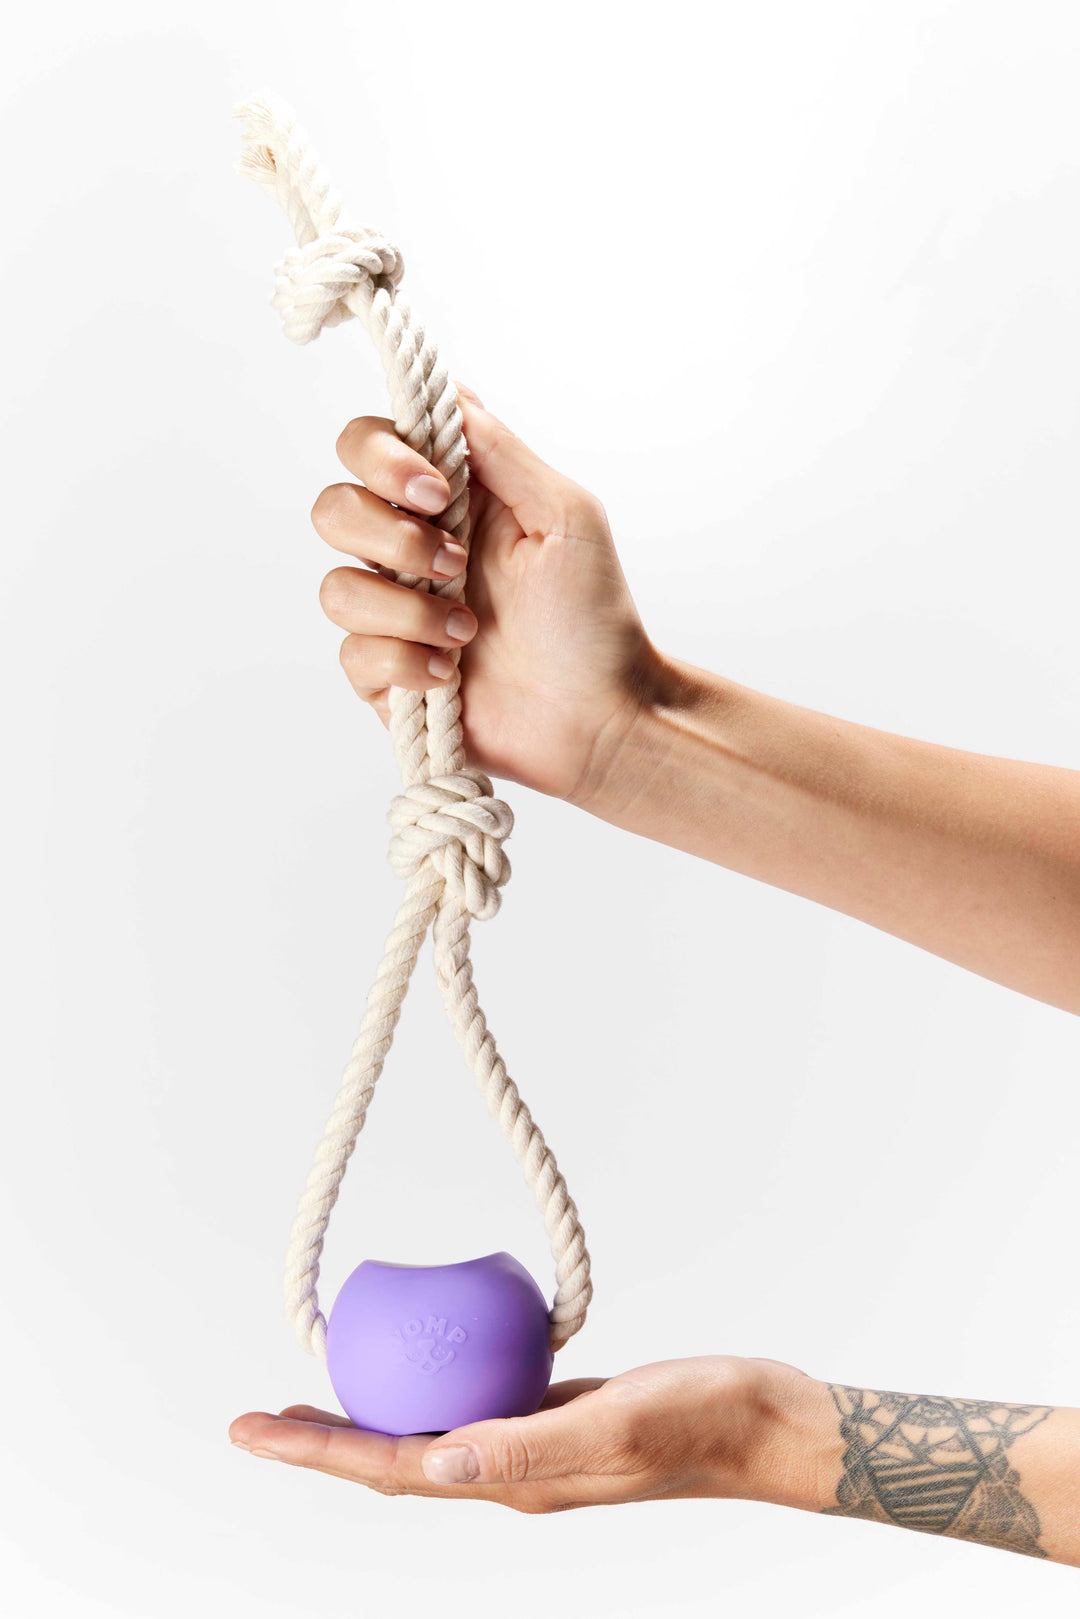 Yomp - Yomp BallRope: Engaging Ball and Rope Toy for Dogs